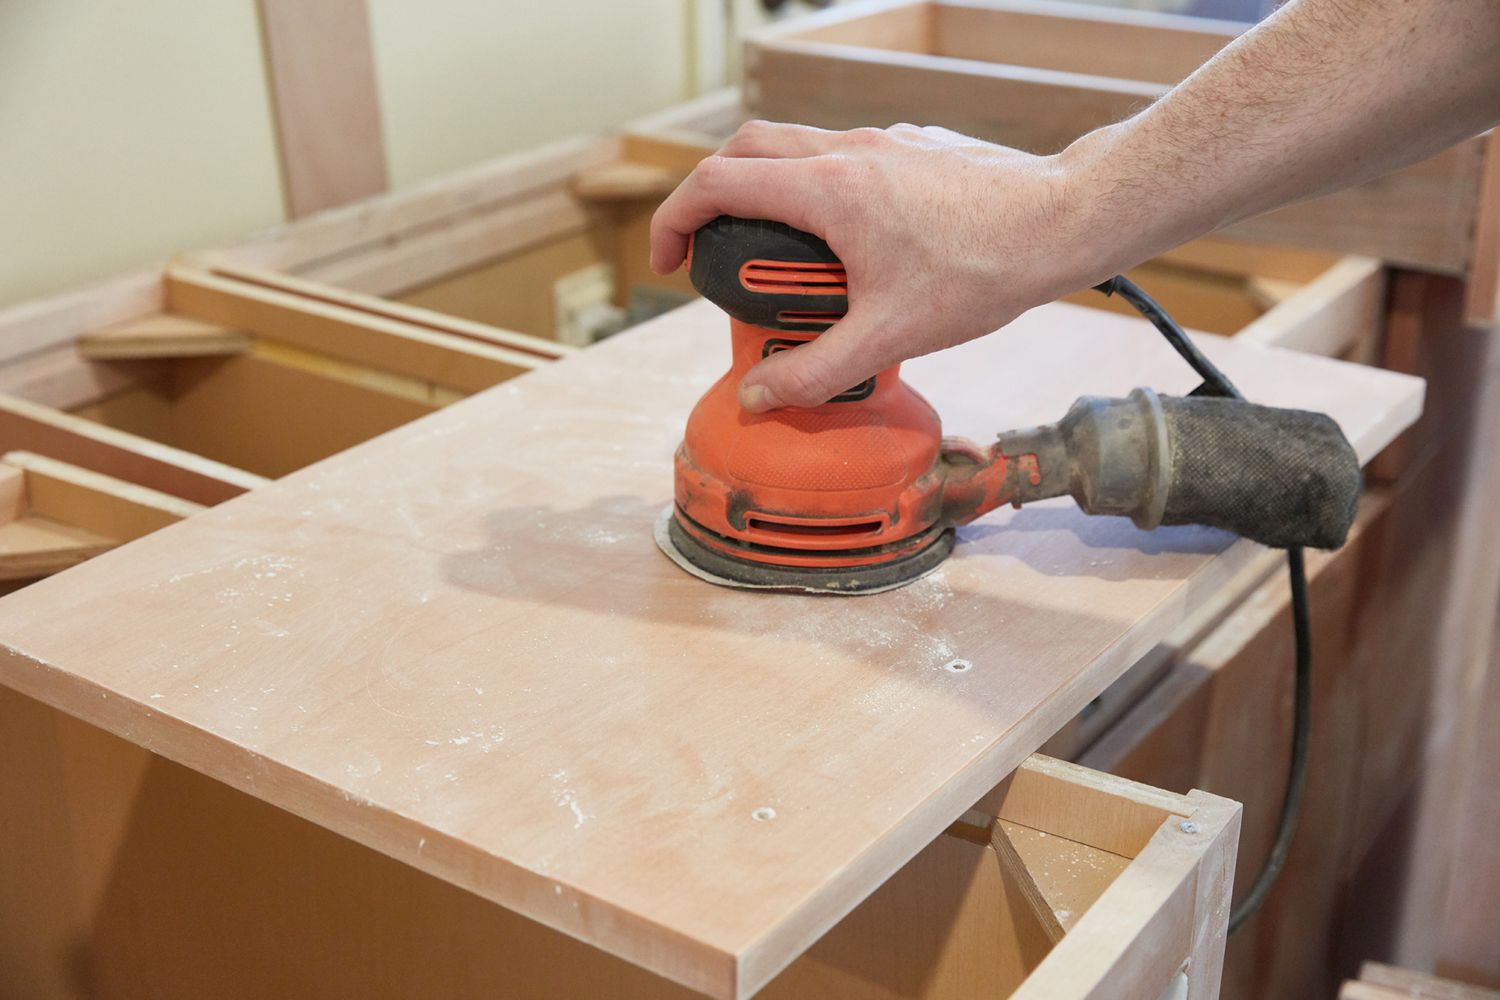 Fine-grit sander passing over kitchen cabinet surface to bring down sheen